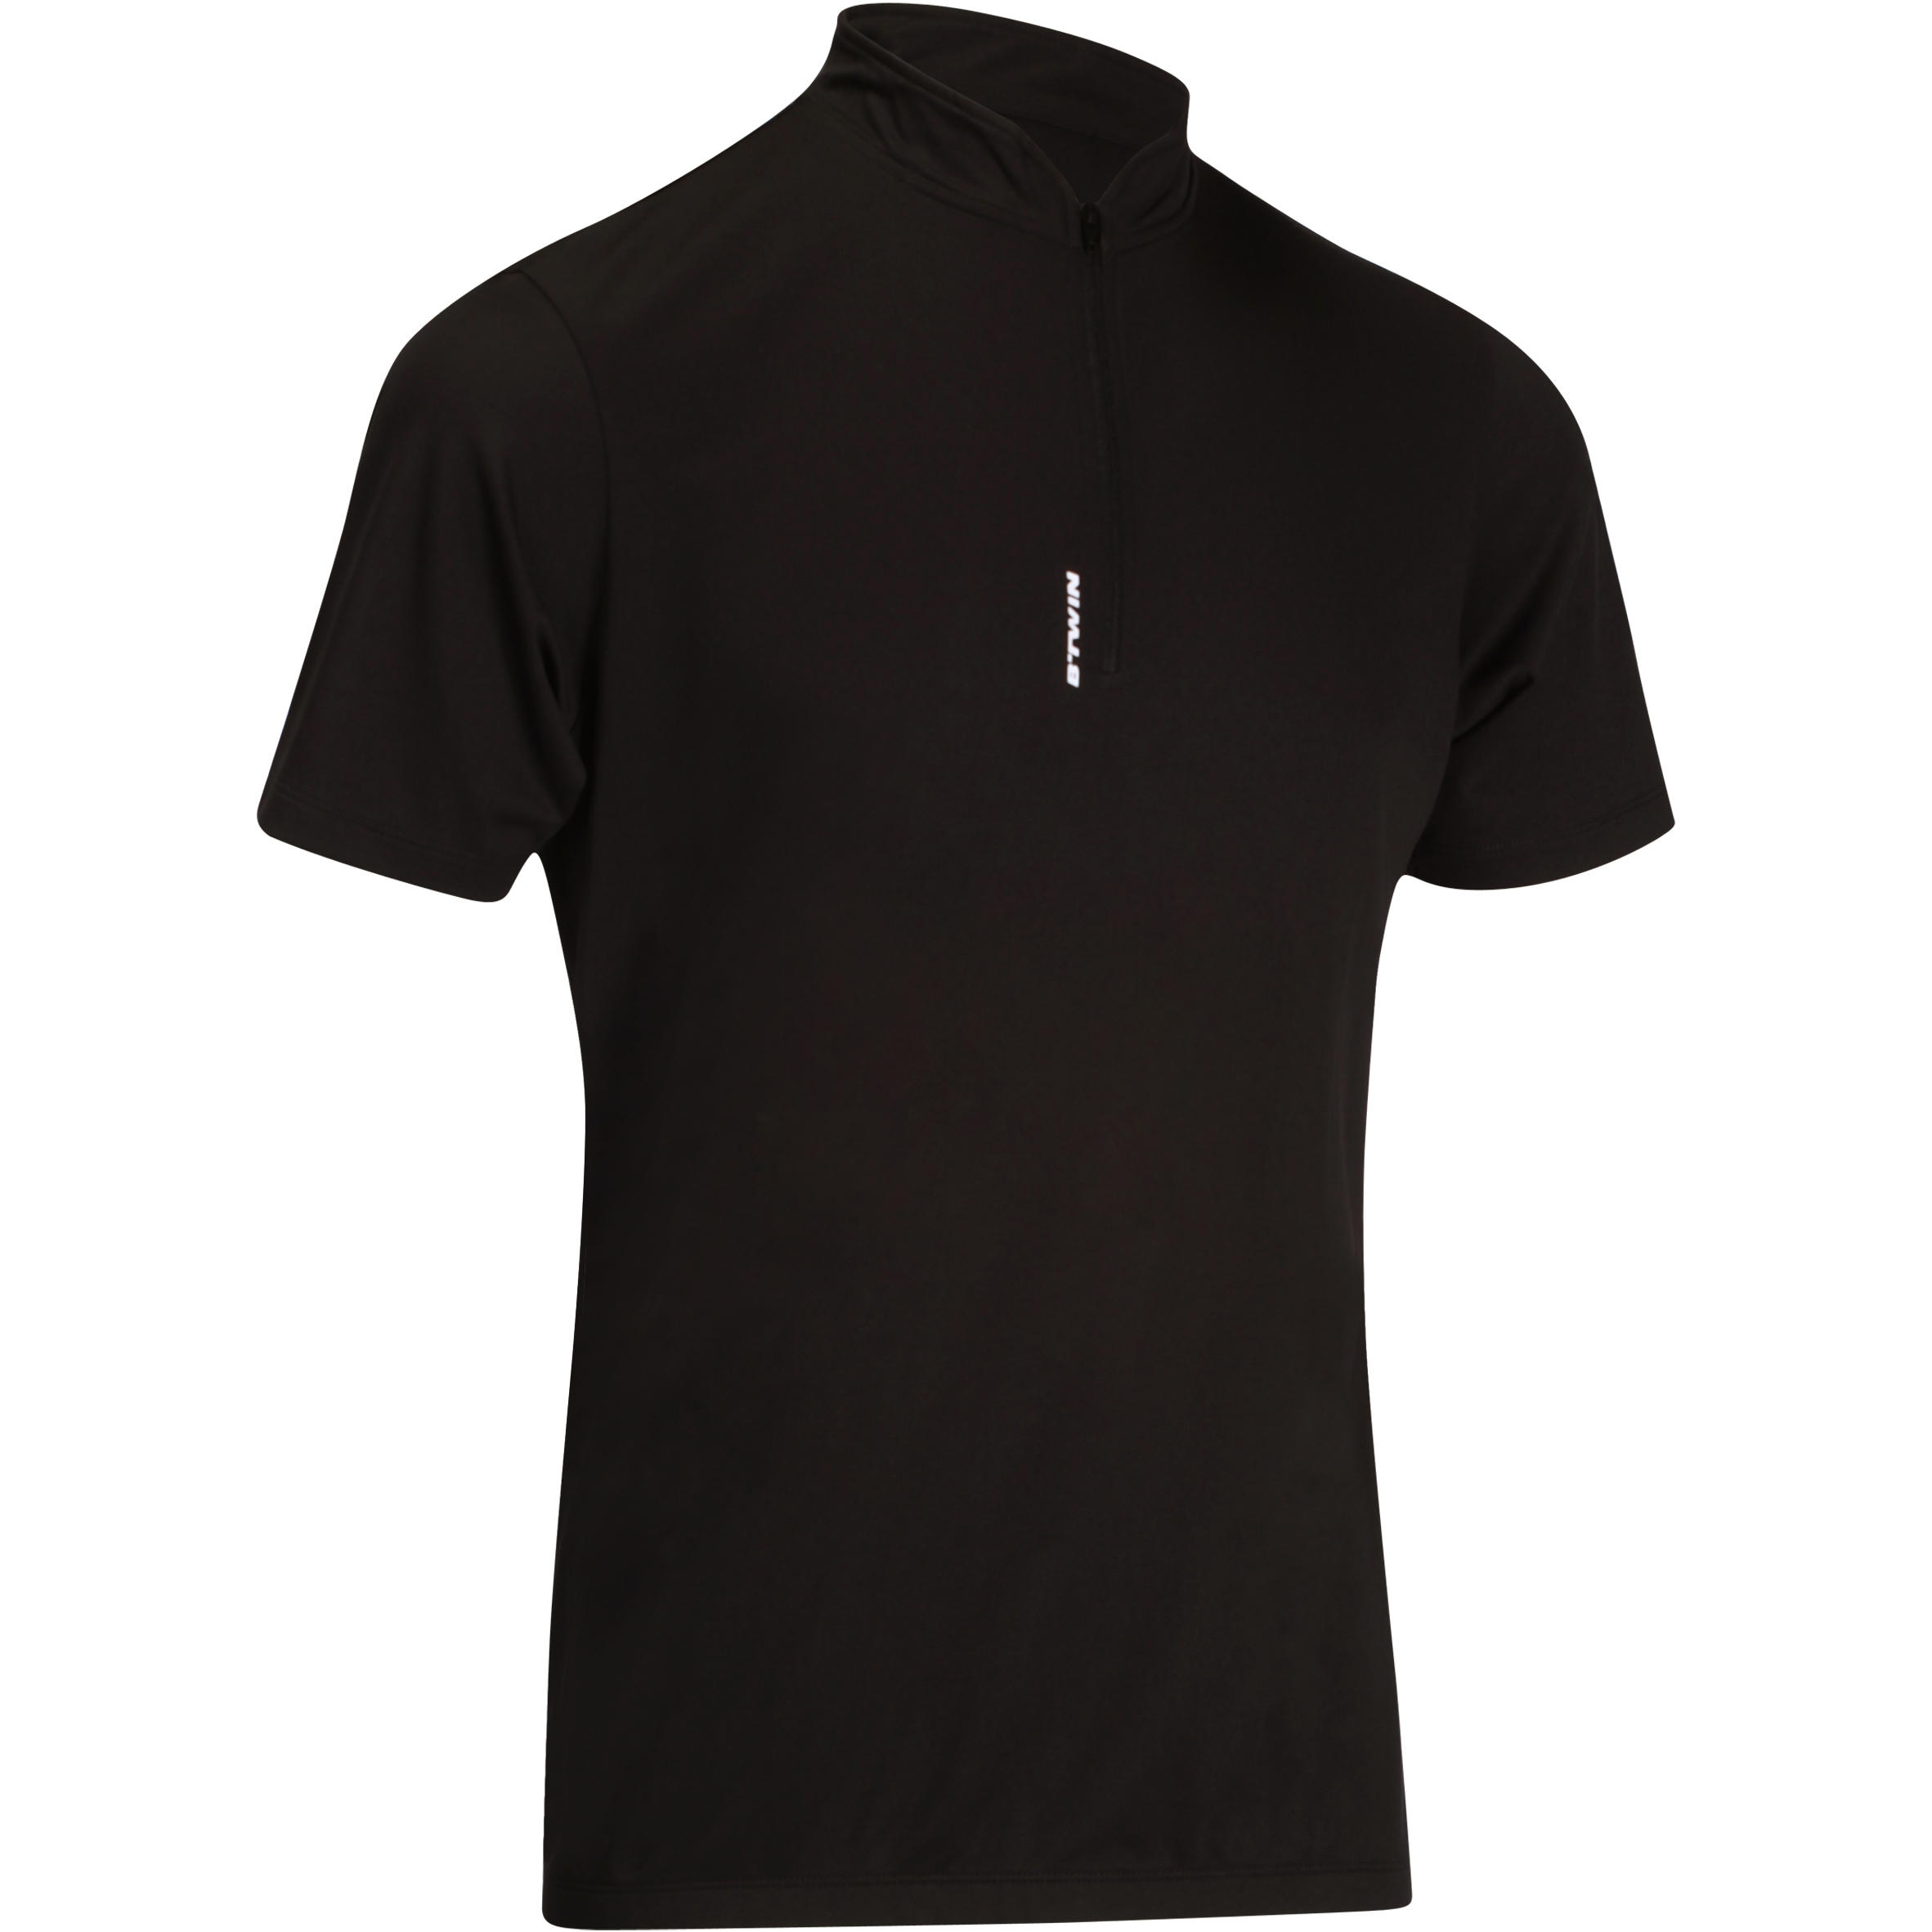 BTWIN Essential Road Cycling Short-Sleeved Jersey - Black